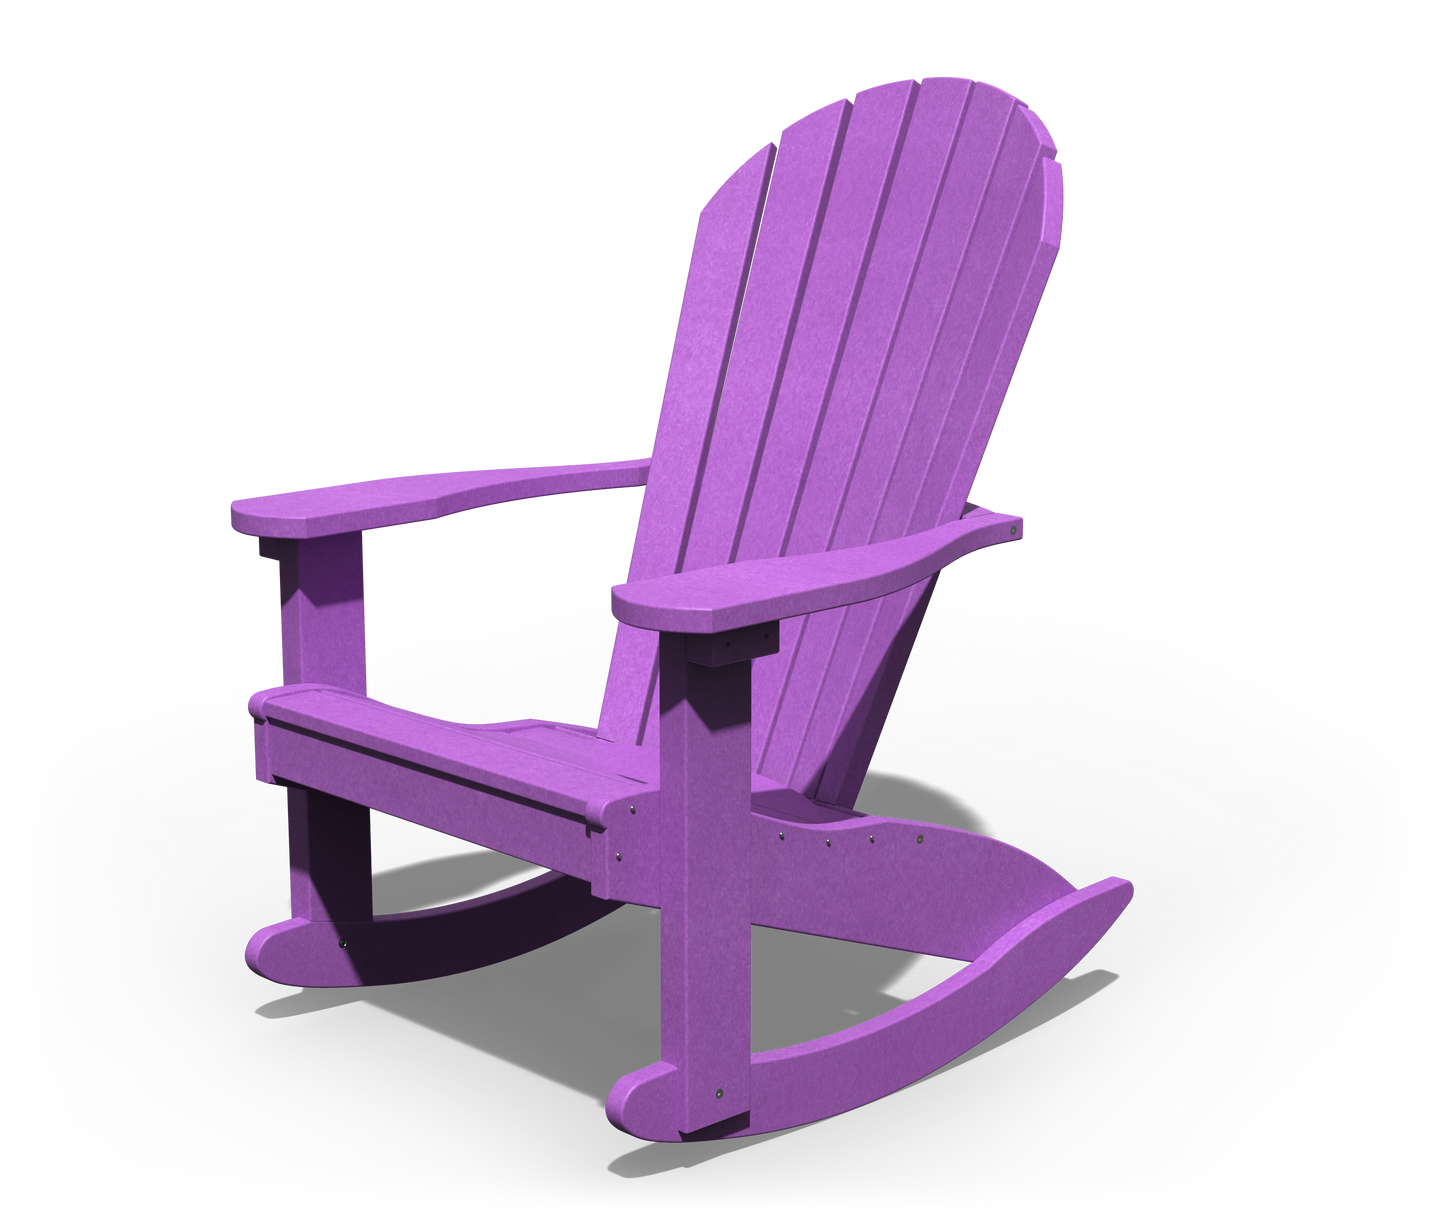 Patiova Recycled Plastic Adirondack Rocking Chair - LEAD TIME TO SHIP 4 WEEKS